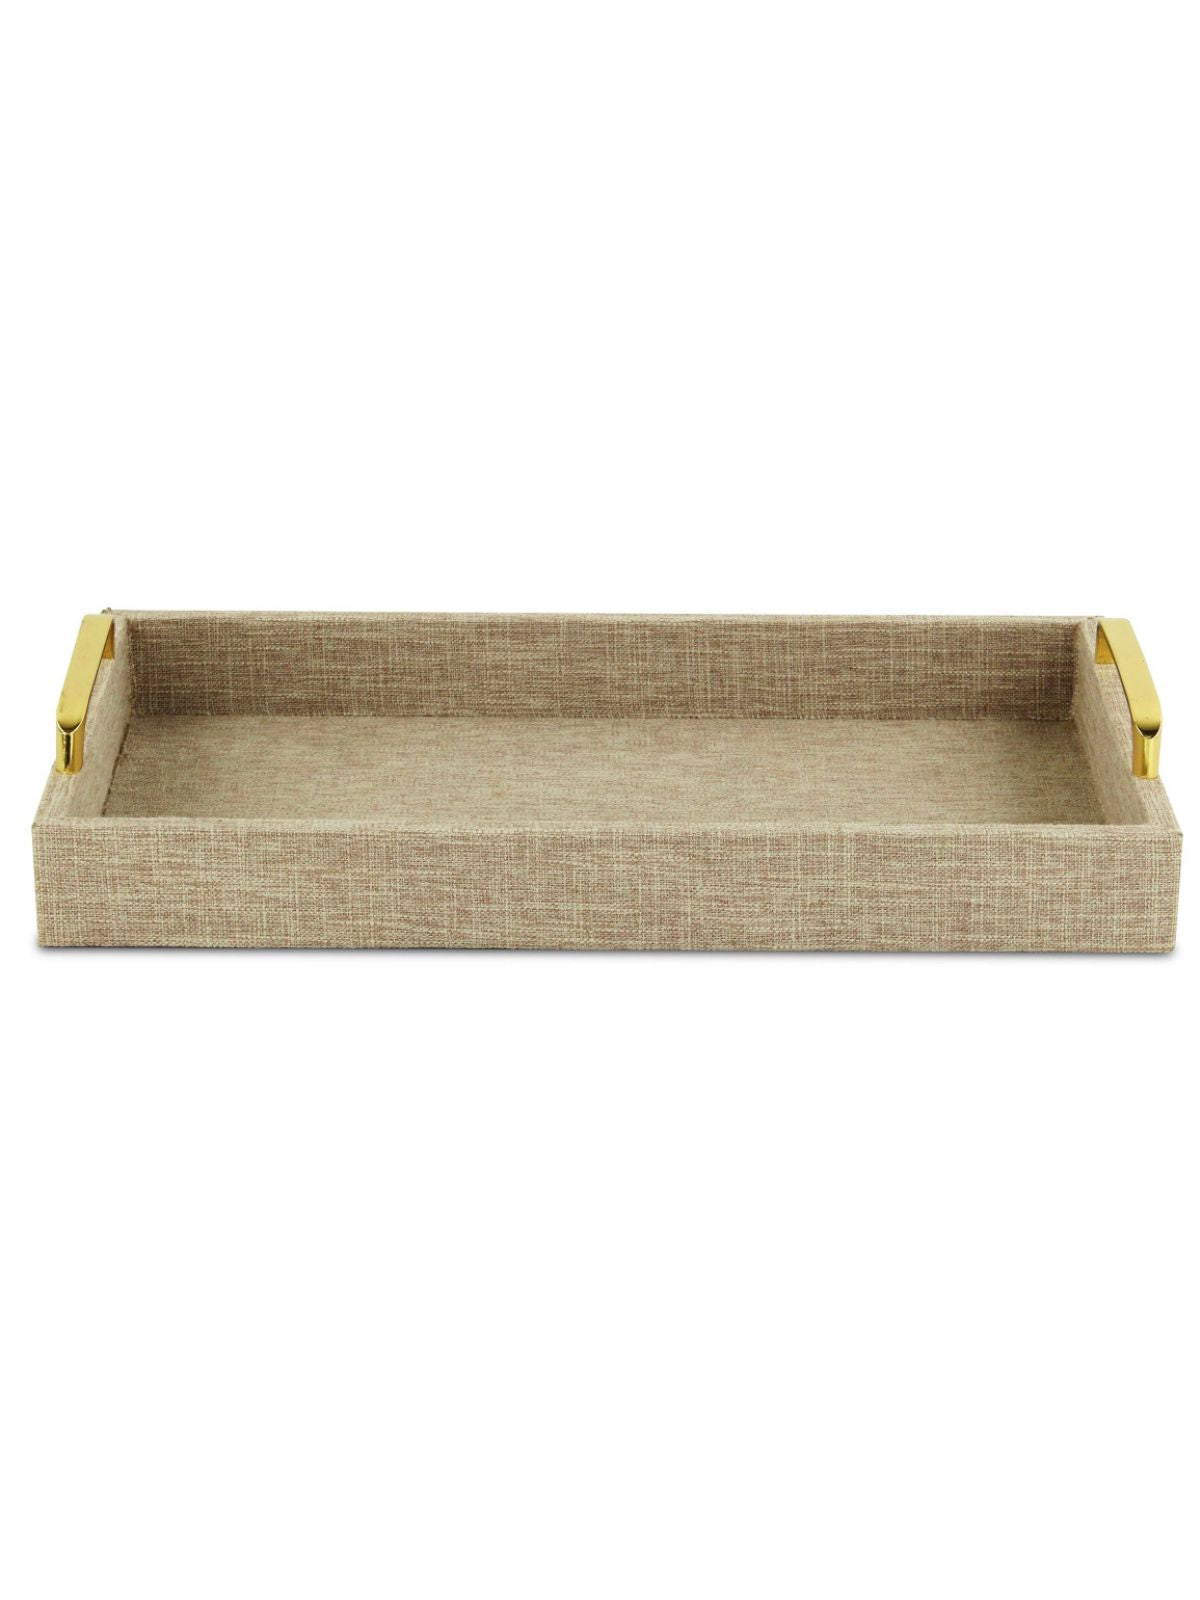 The Isola Di Canter Linen Tray in Beige is an entirely handmade and hand-crafted design that blends an engineered wood frame with a linen outer fabric and metal hardware.